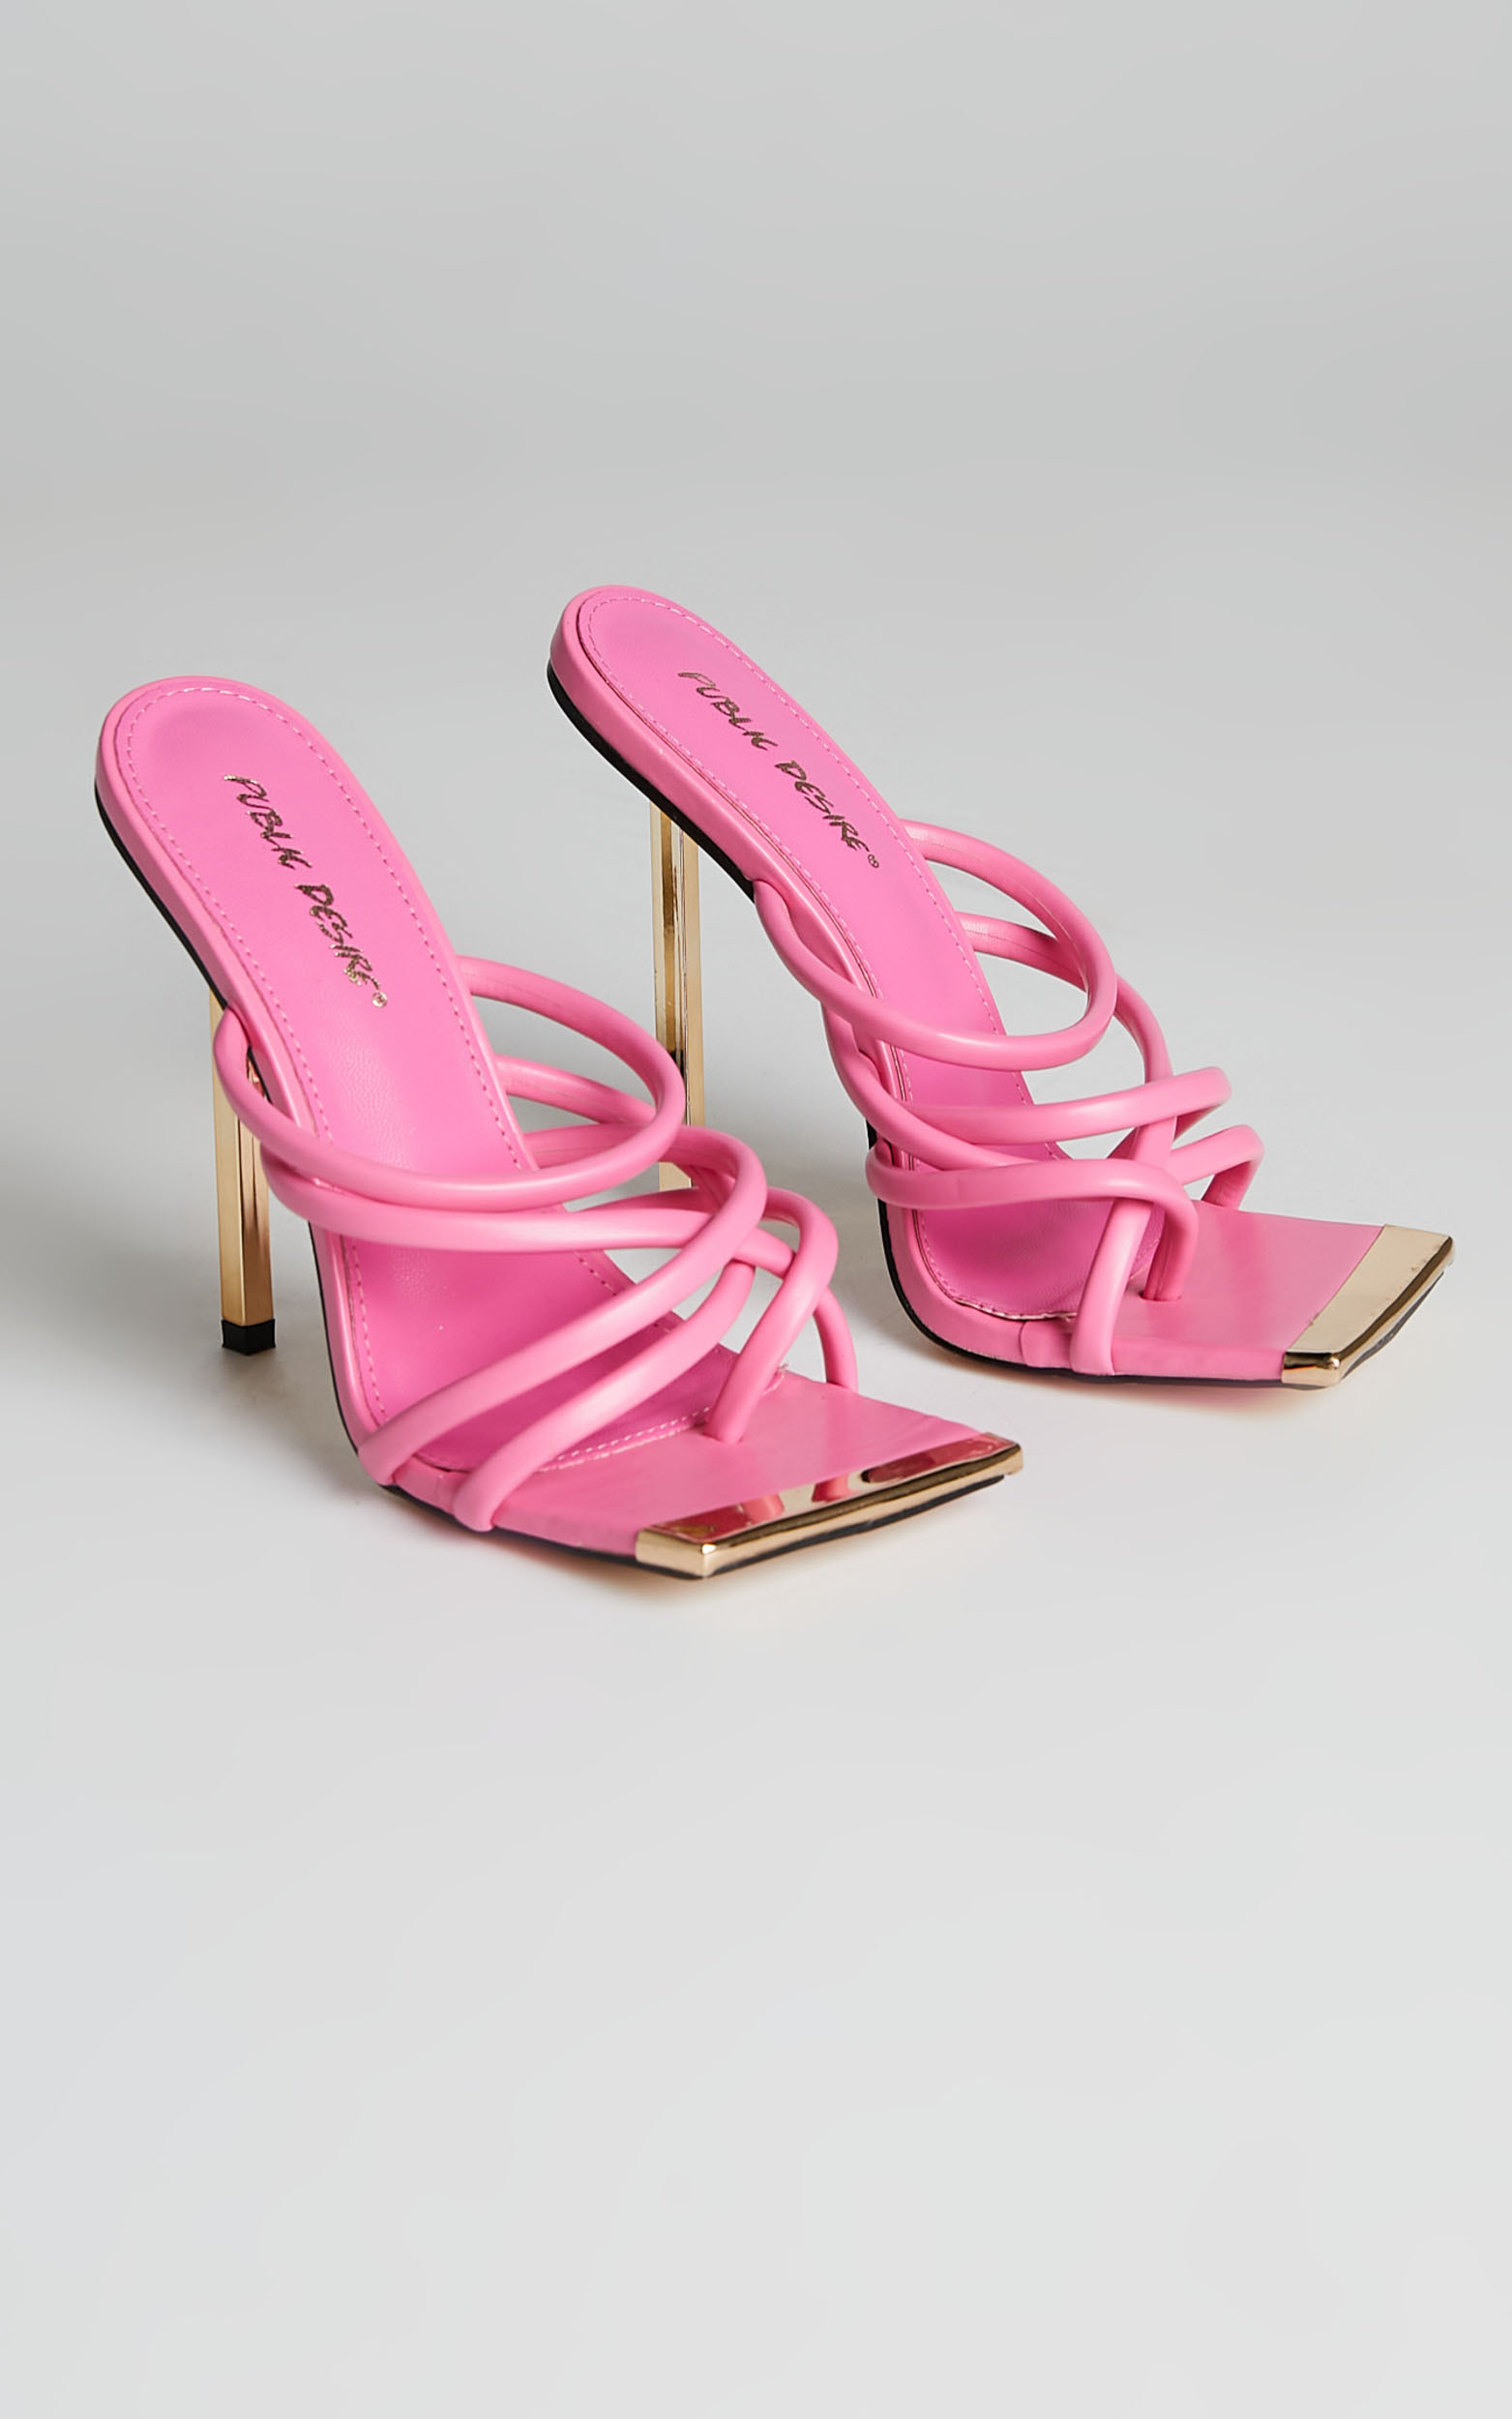 Public Desire - Coincidence Strappy Square Toe Metallic Stiletto Heels in Pink - 05, PNK1, hi-res image number null